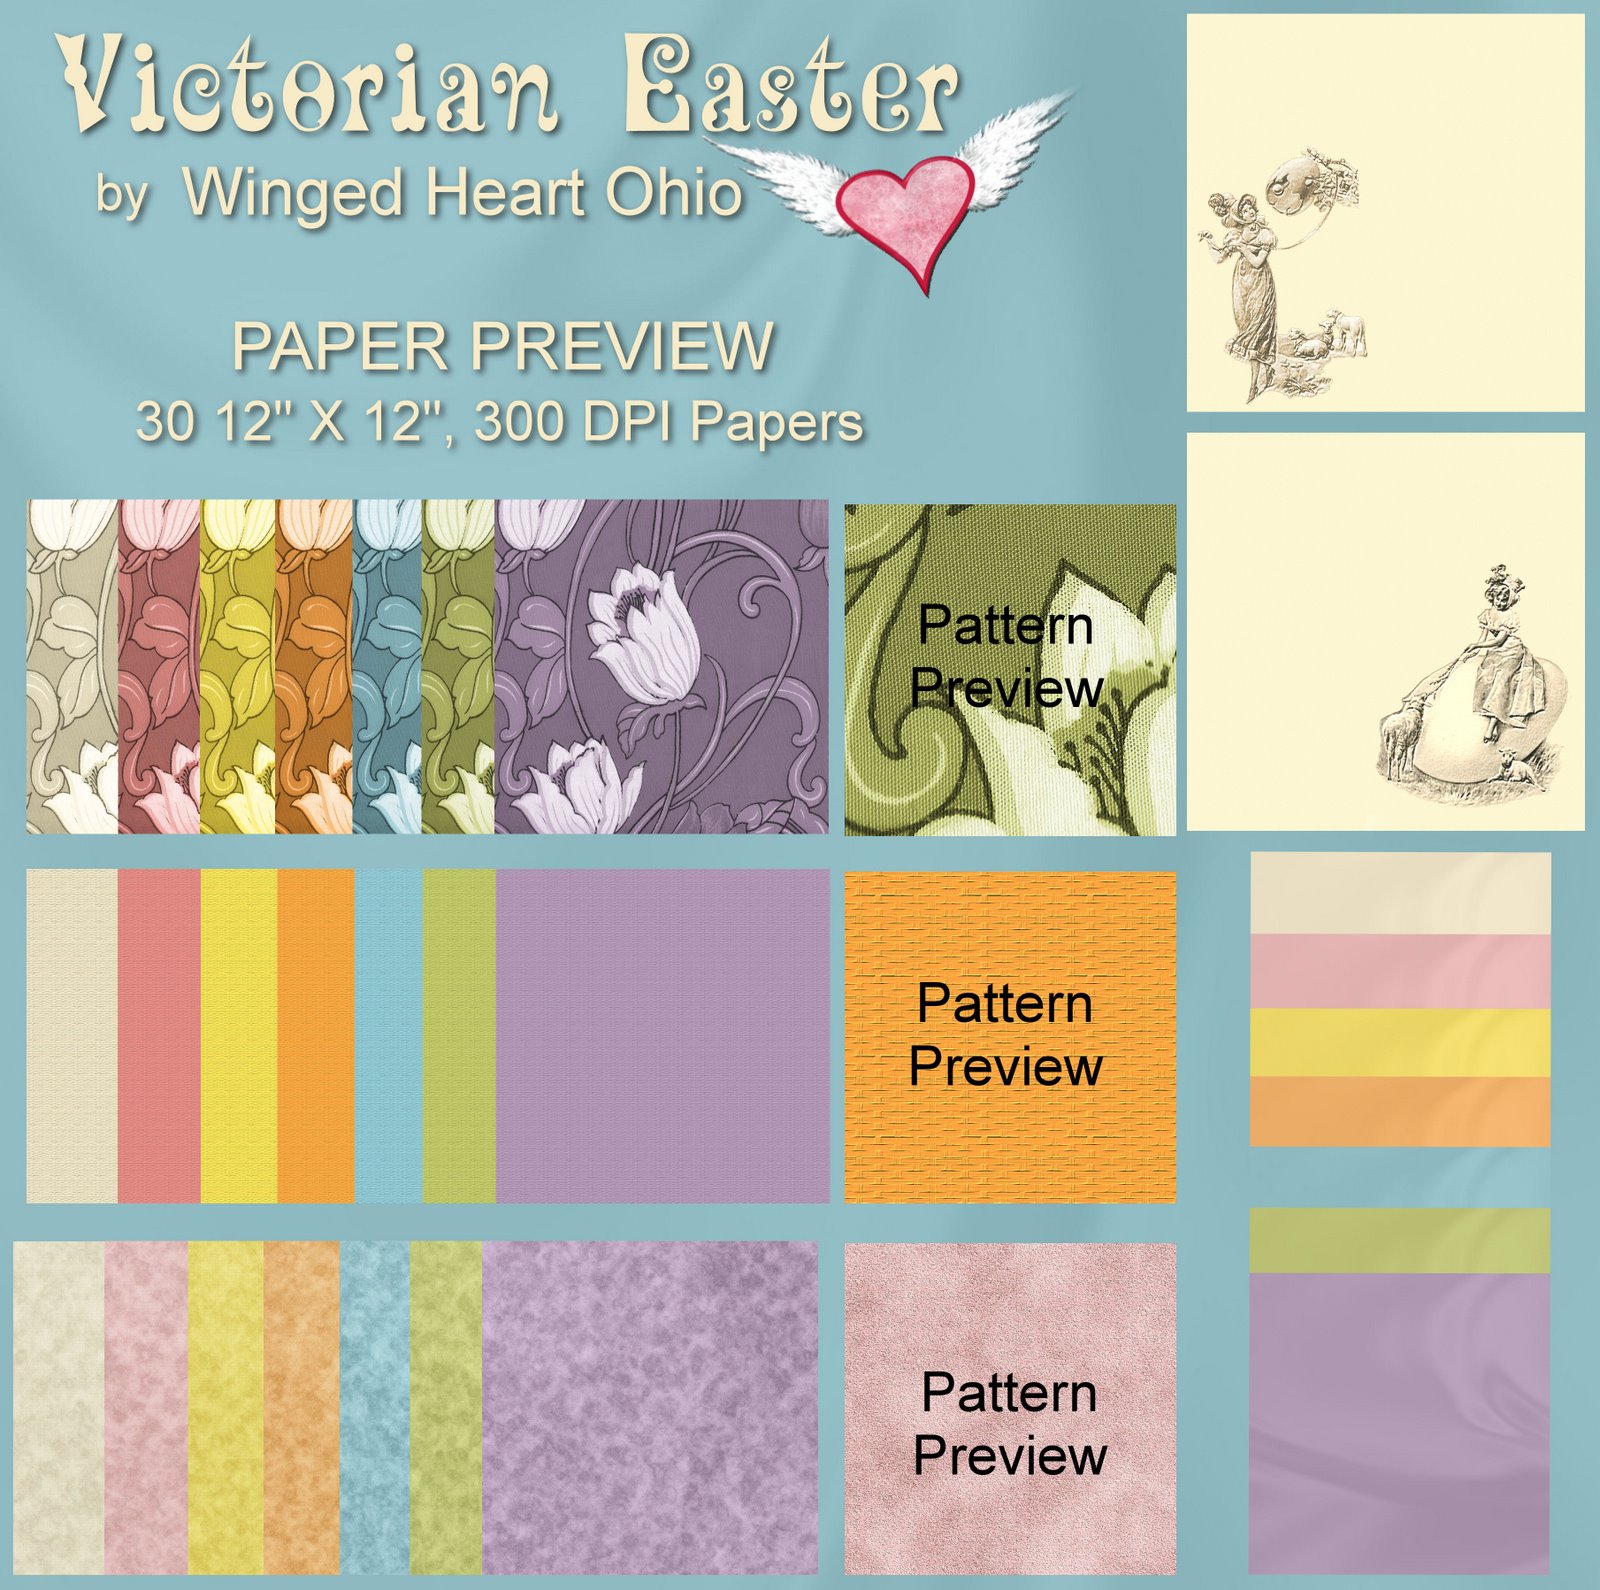 [WH_VictorianEaster_Preview1.jpg]